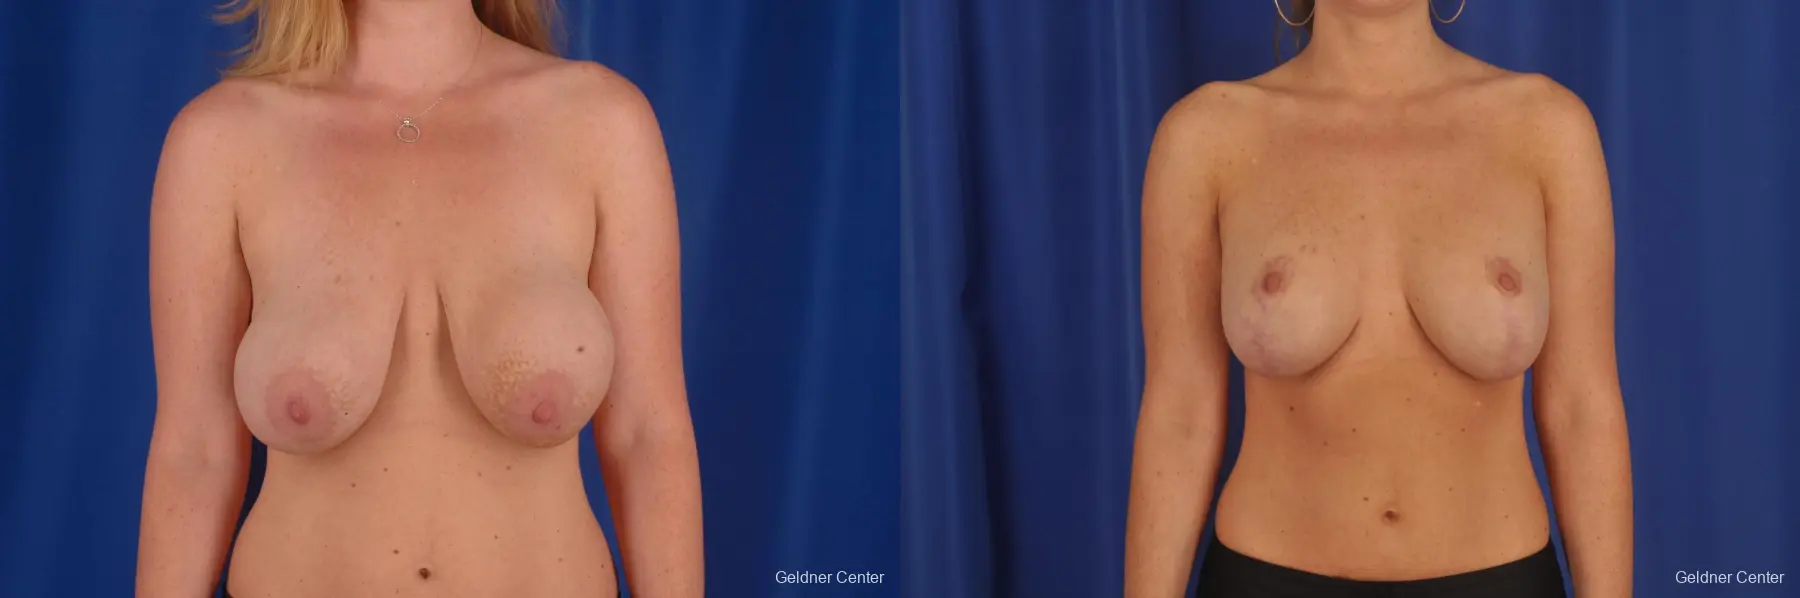 Complex Breast Augmentation Lake Shore Dr, Chicago 2290 - Before and After 1